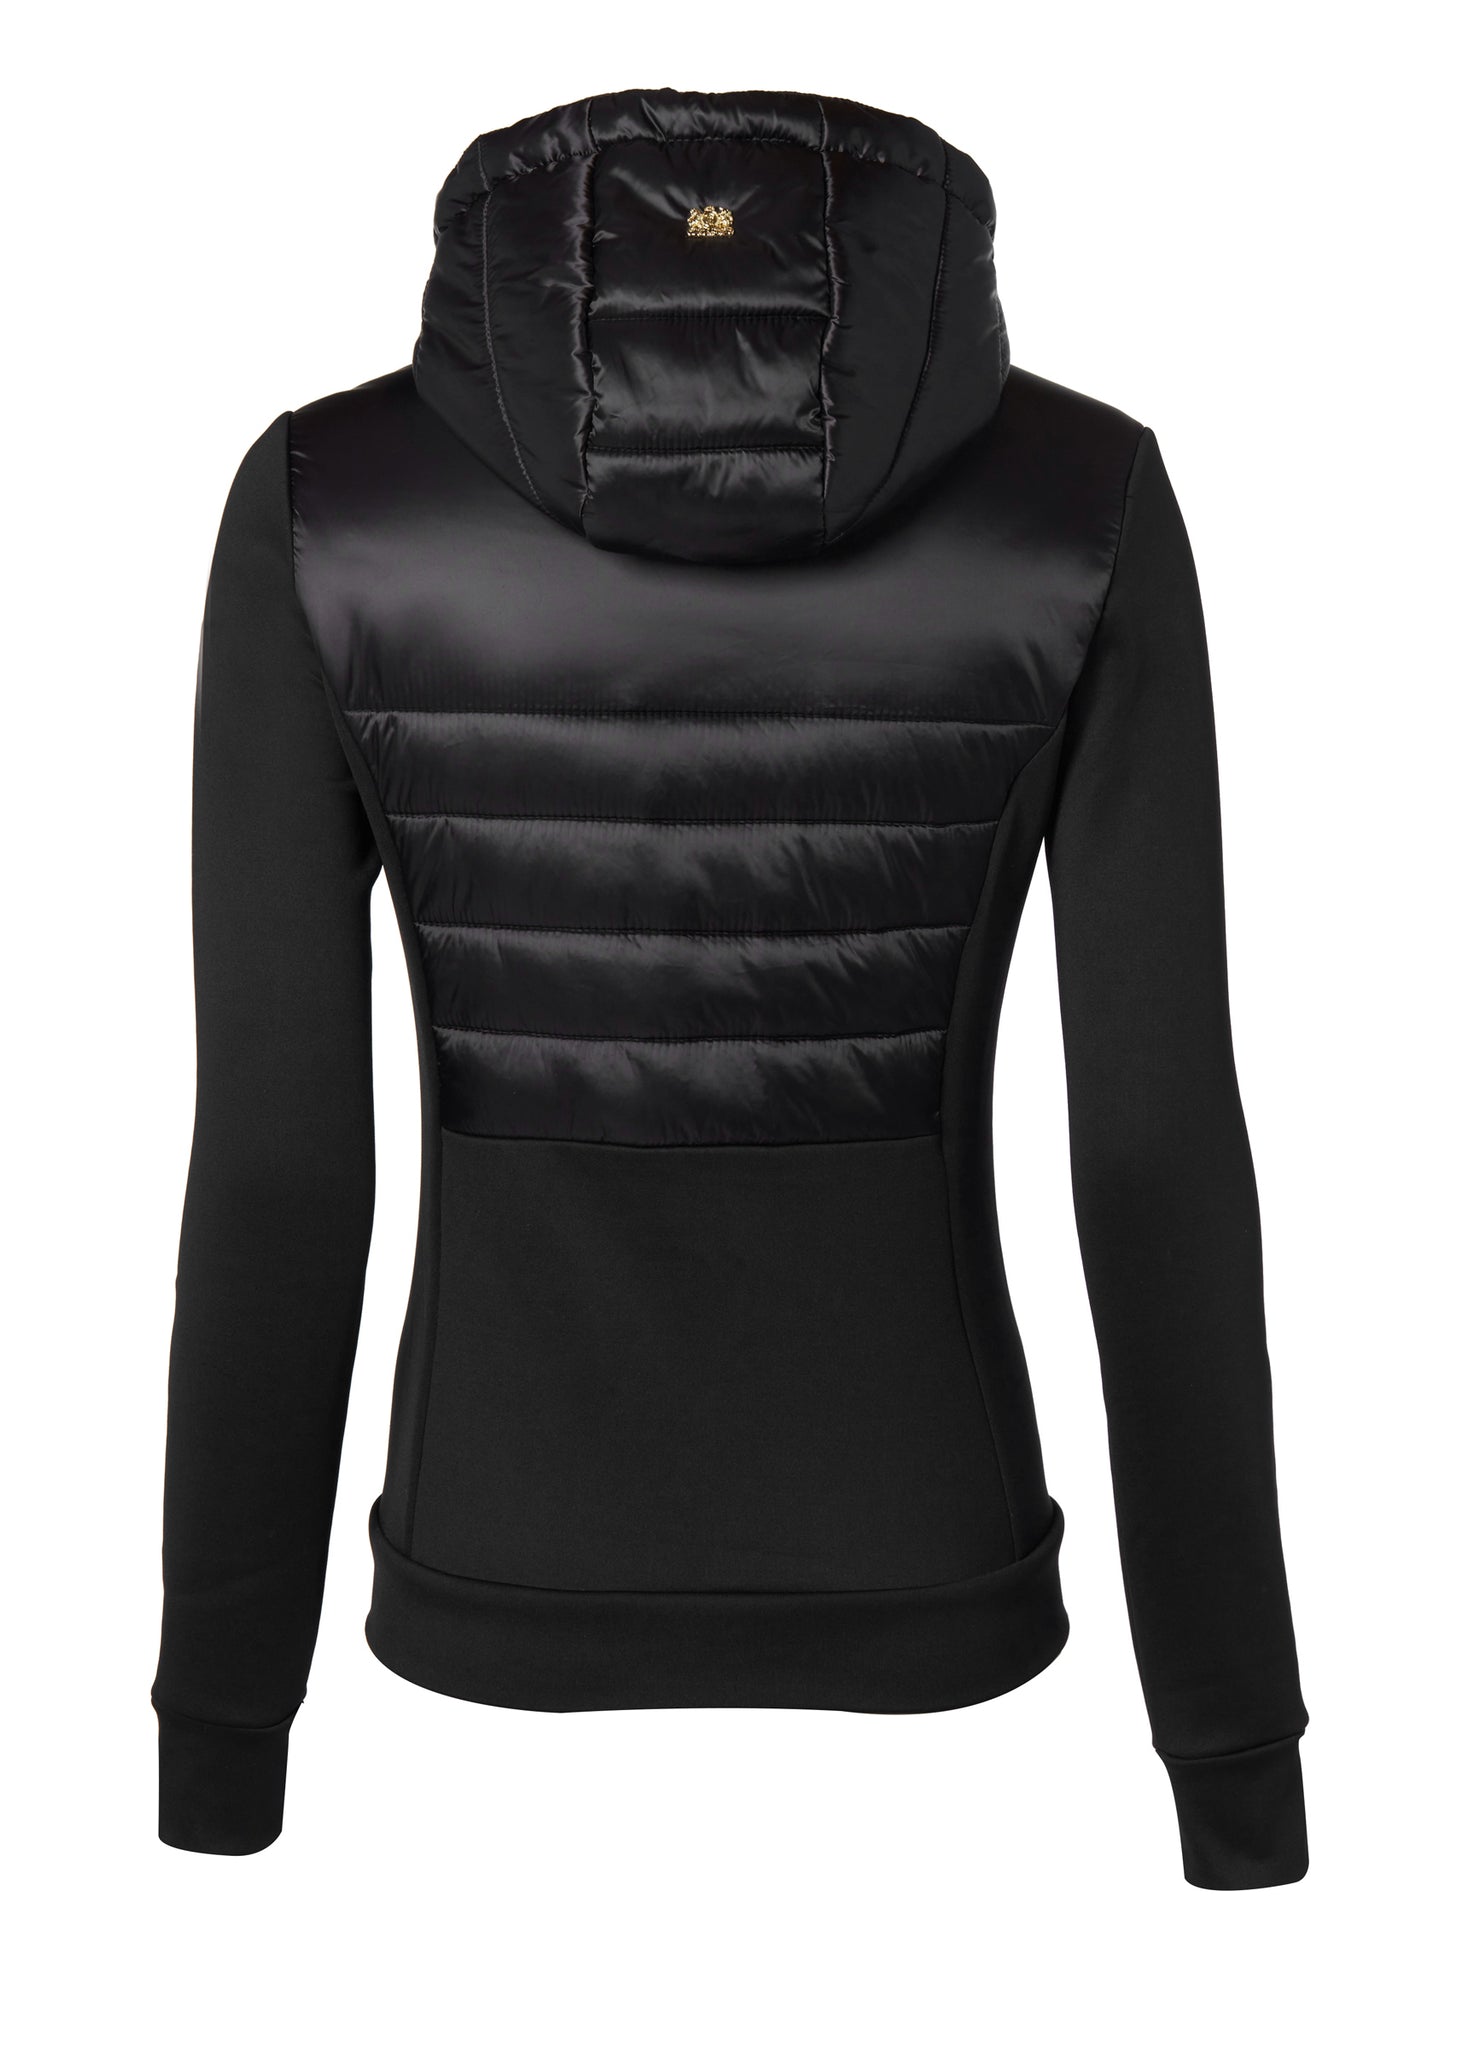 back of hooded hybrid jacket in black with jersey panels on the waist and sleeves and Sorona eco down fill on hood front and back body panels finished with rubbed zip fastening in black and two side pockets with the same zip fastenings